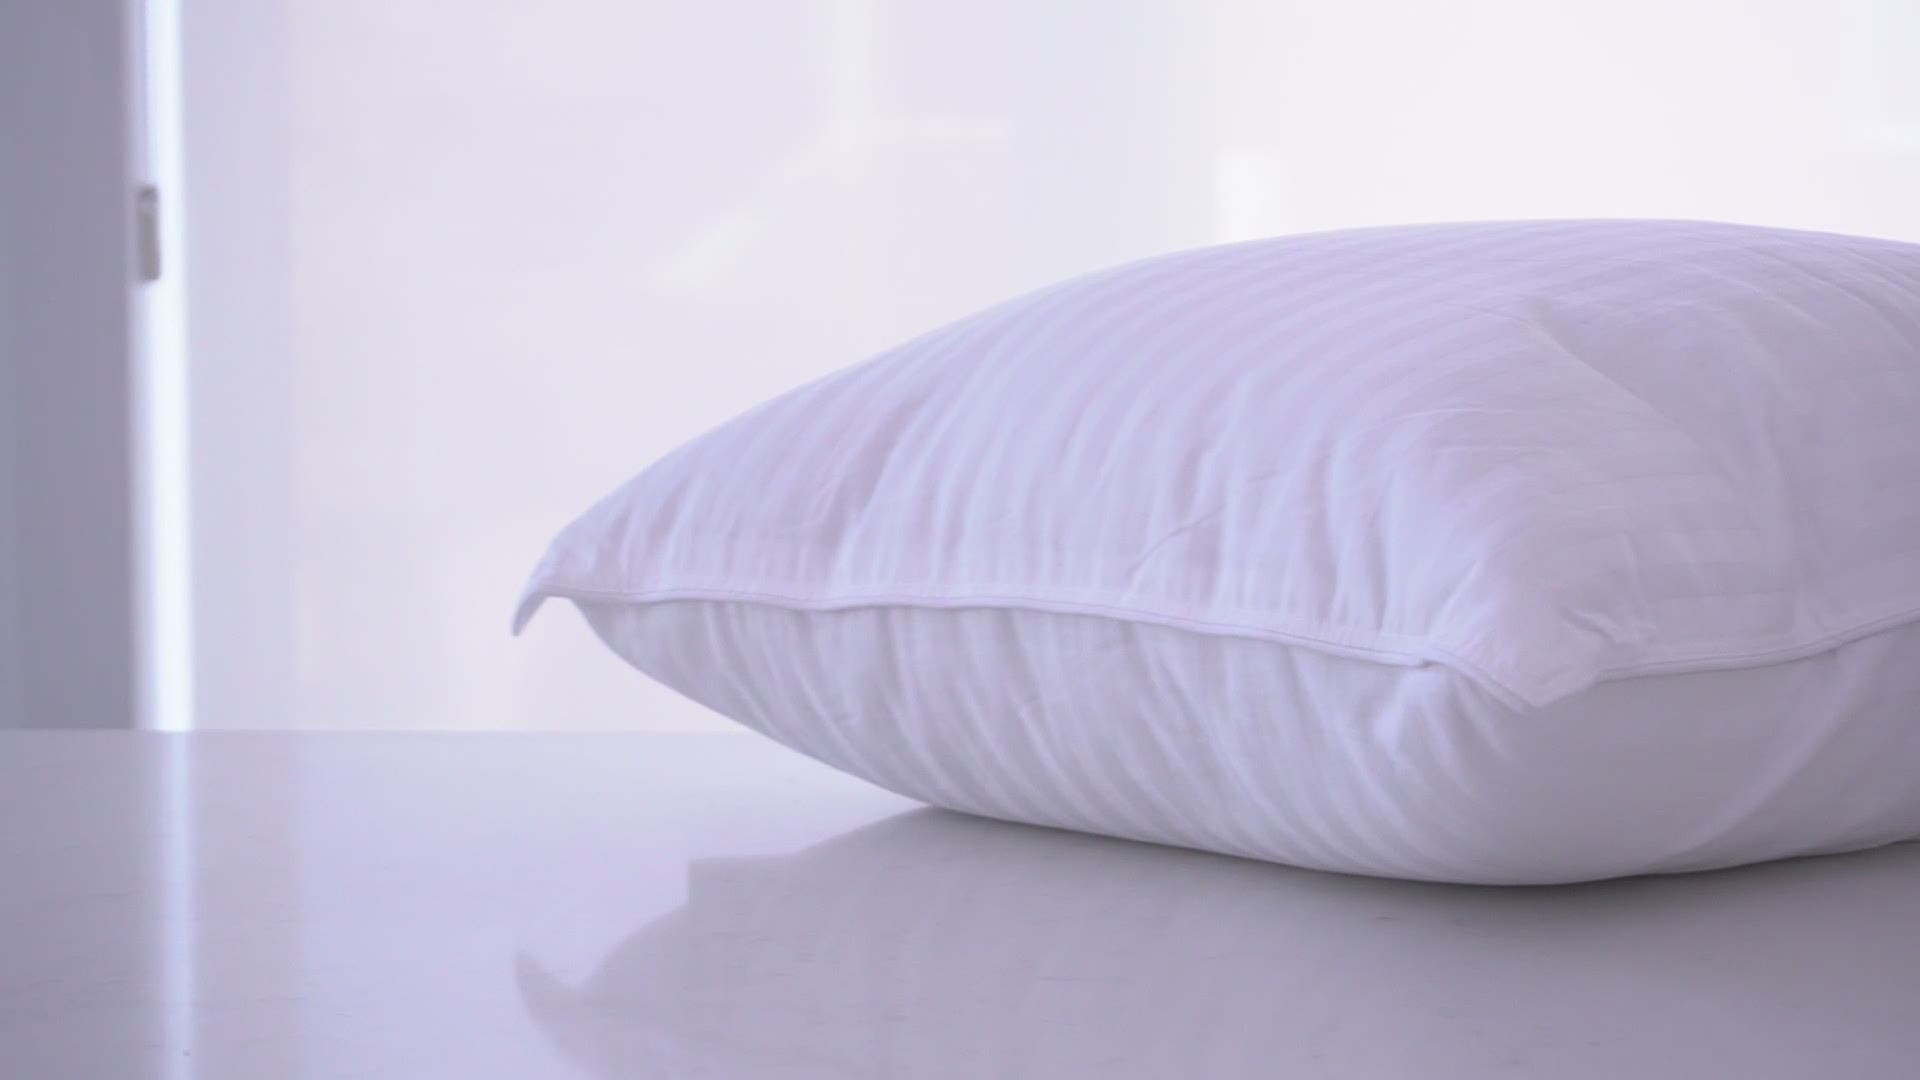 This top-rated pillow which uses new robotic developed smart technology to promote deep sleep. For a link to this deal, visit our station website /waystosave